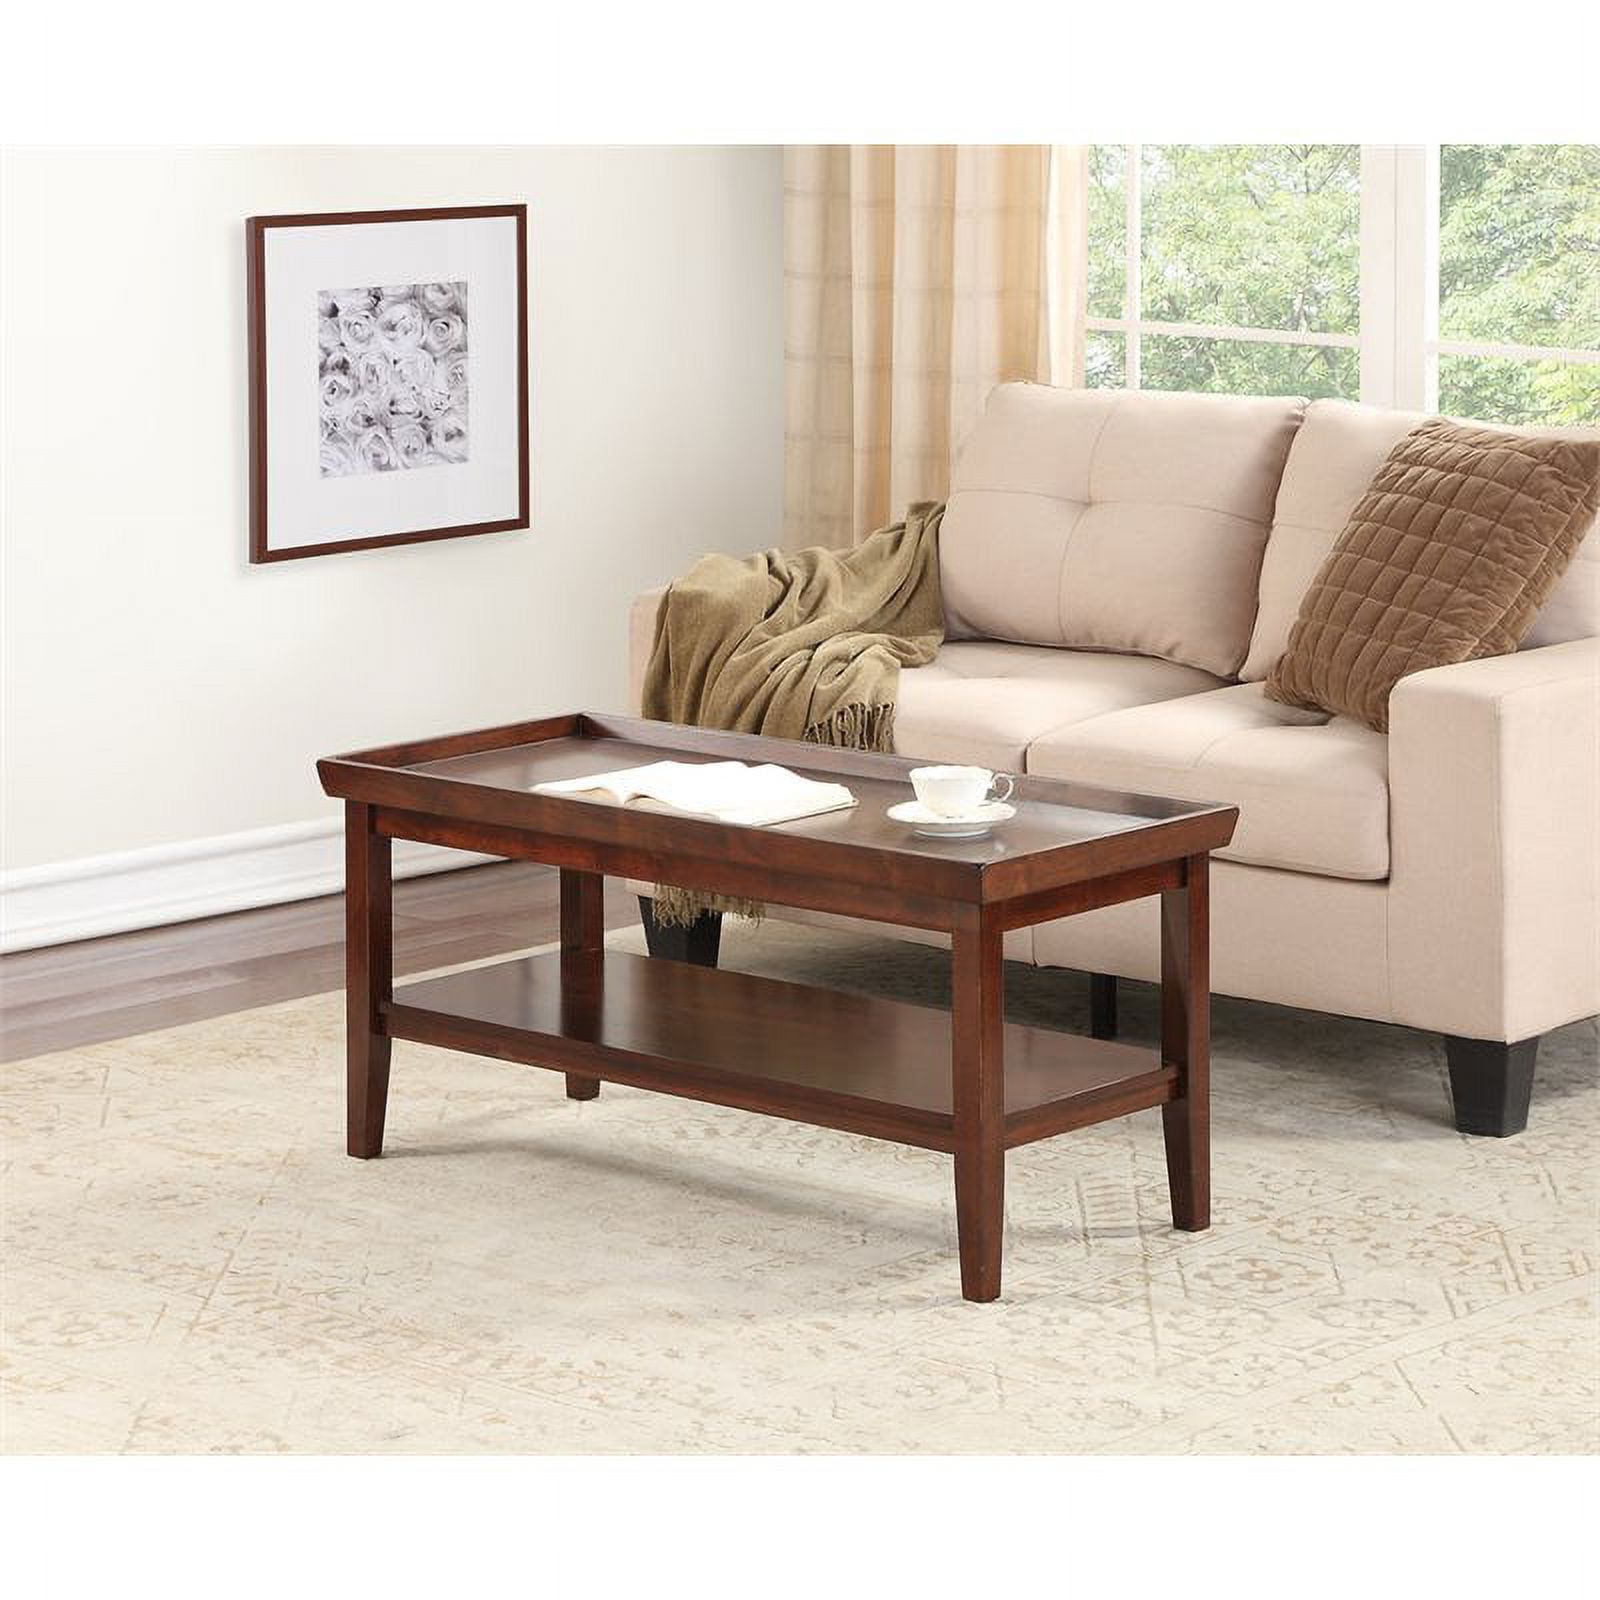 Pemberly Row Coffee Table In Espresso Wood Finish – Walmart Inside Trendy Espresso Wood Finish Coffee Tables (Photo 6 of 10)